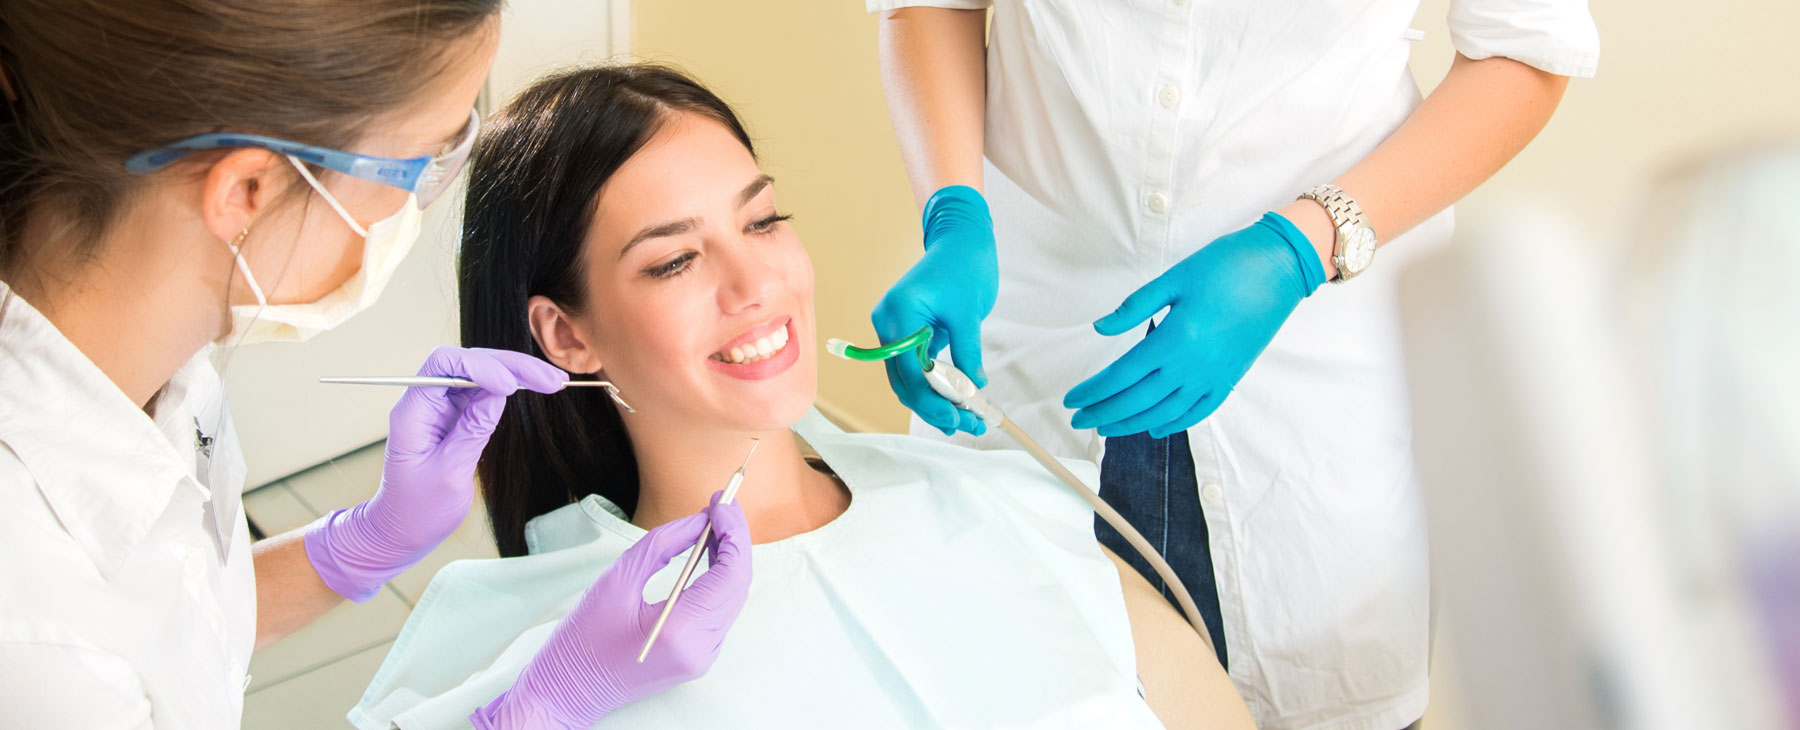 Dental Business Loan: What to Know